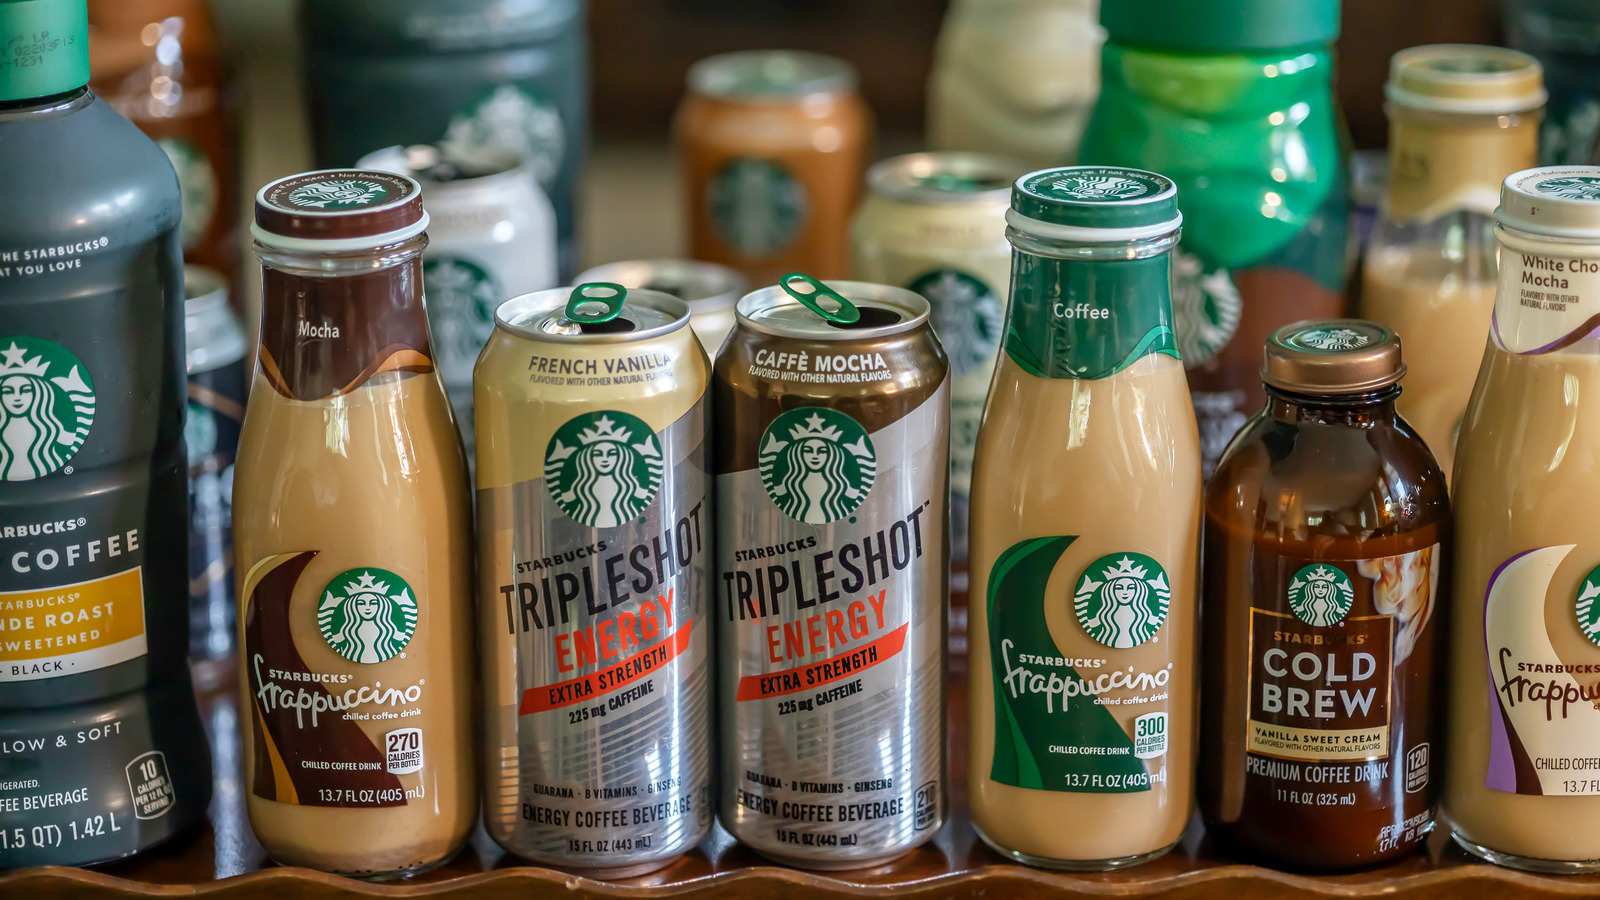 https://www.mashed.com/img/gallery/bottled-and-canned-starbucks-drinks-ranked-worst-to-best/l-intro-1685556735.jpg